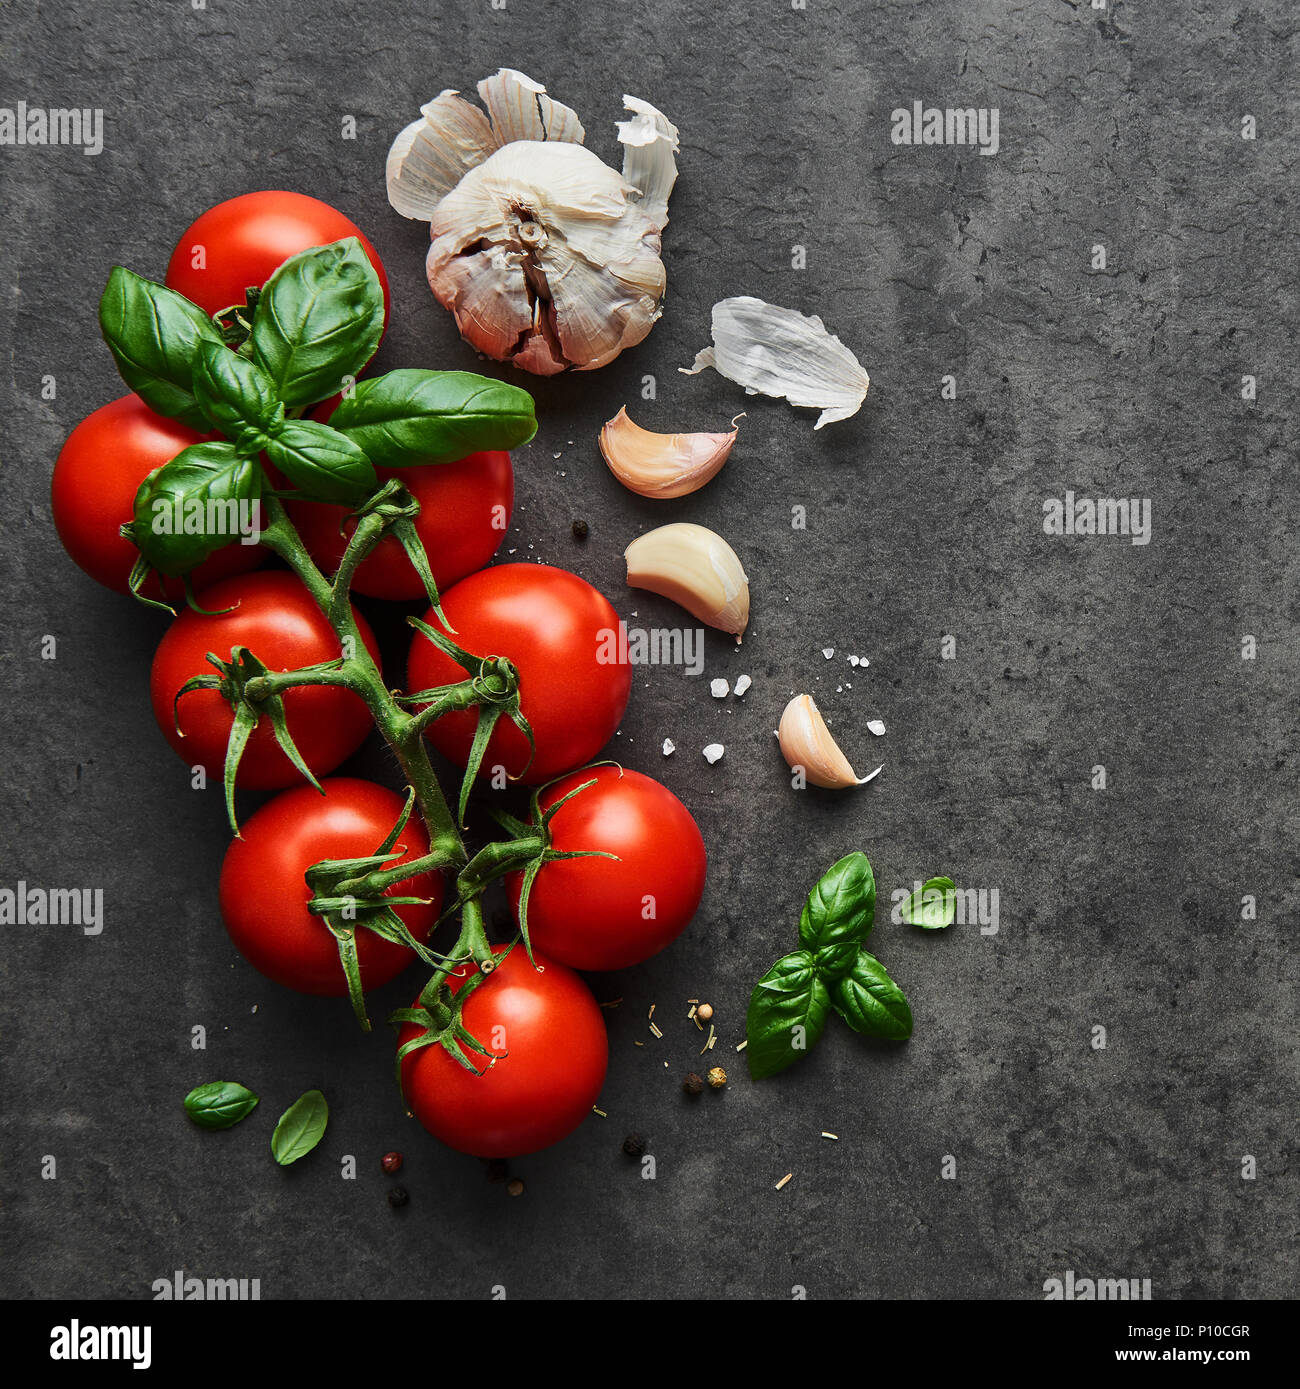 Food background. Flat lay of fresh tomatoes with basil, garlic and sea salt on black stone background. Square crop, top view. Stock Photo